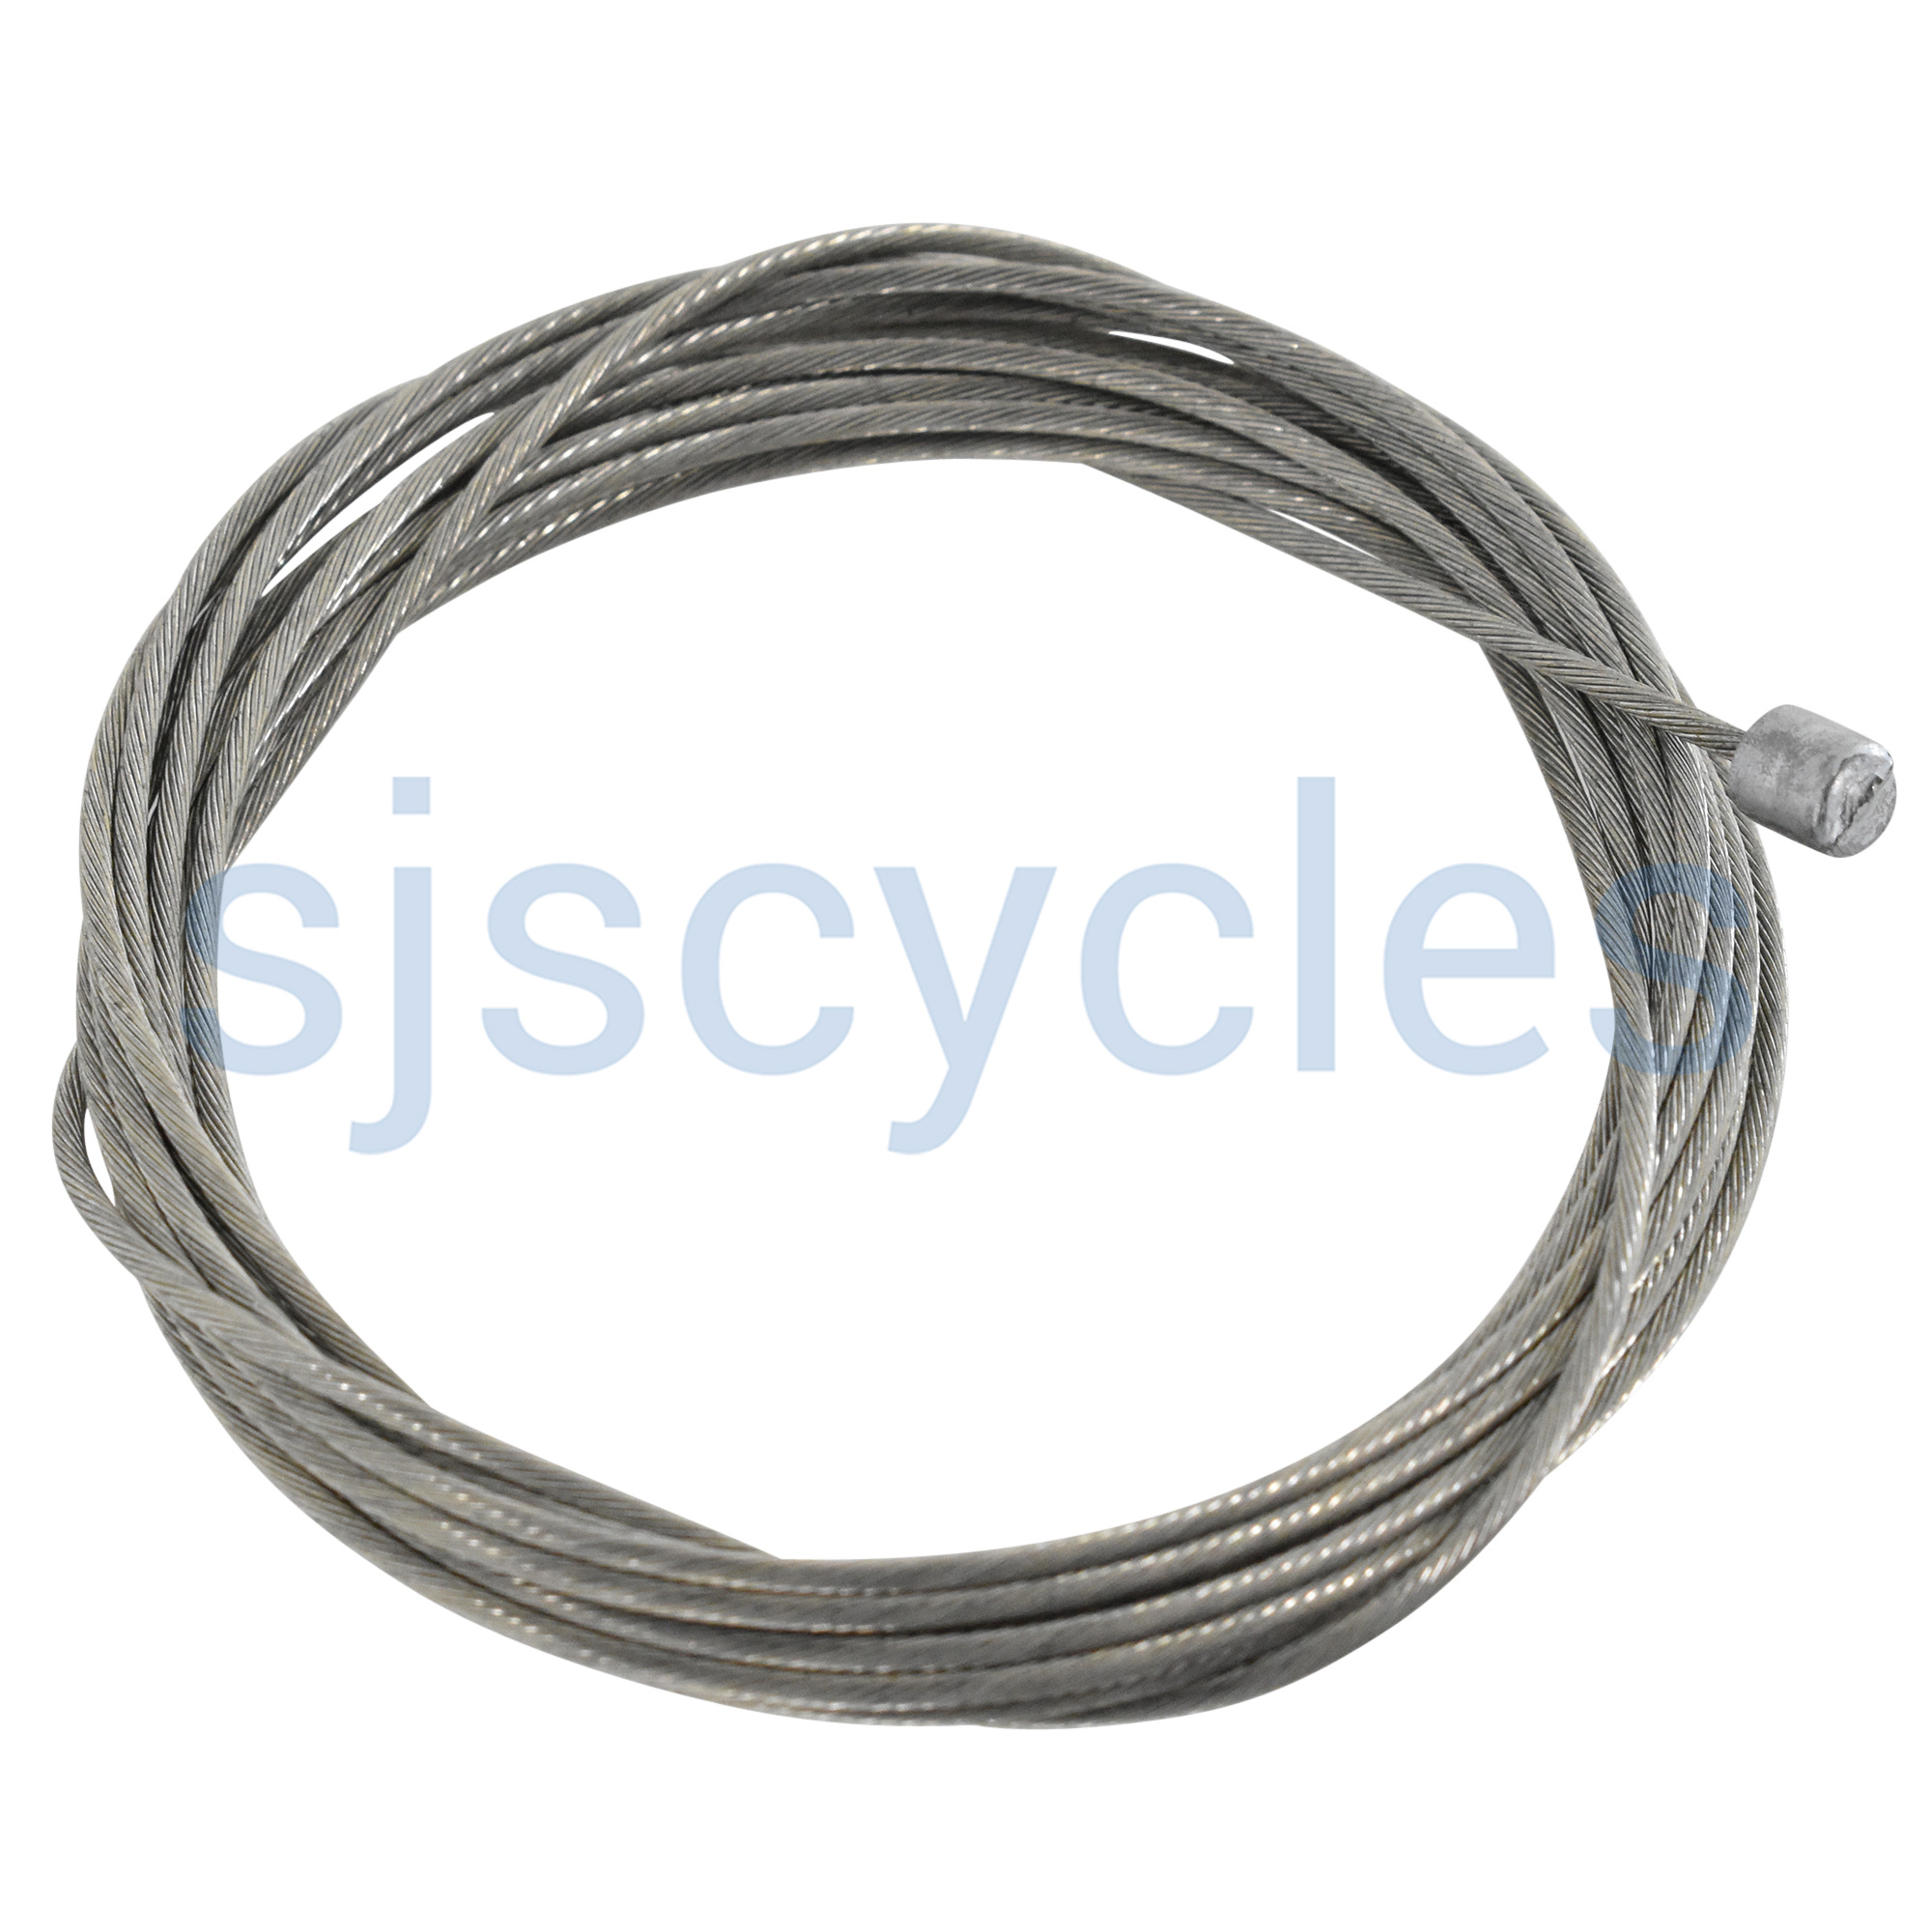 volume Verzorgen Aan boord Shimano SIS 1.2mm gear inner cable wire